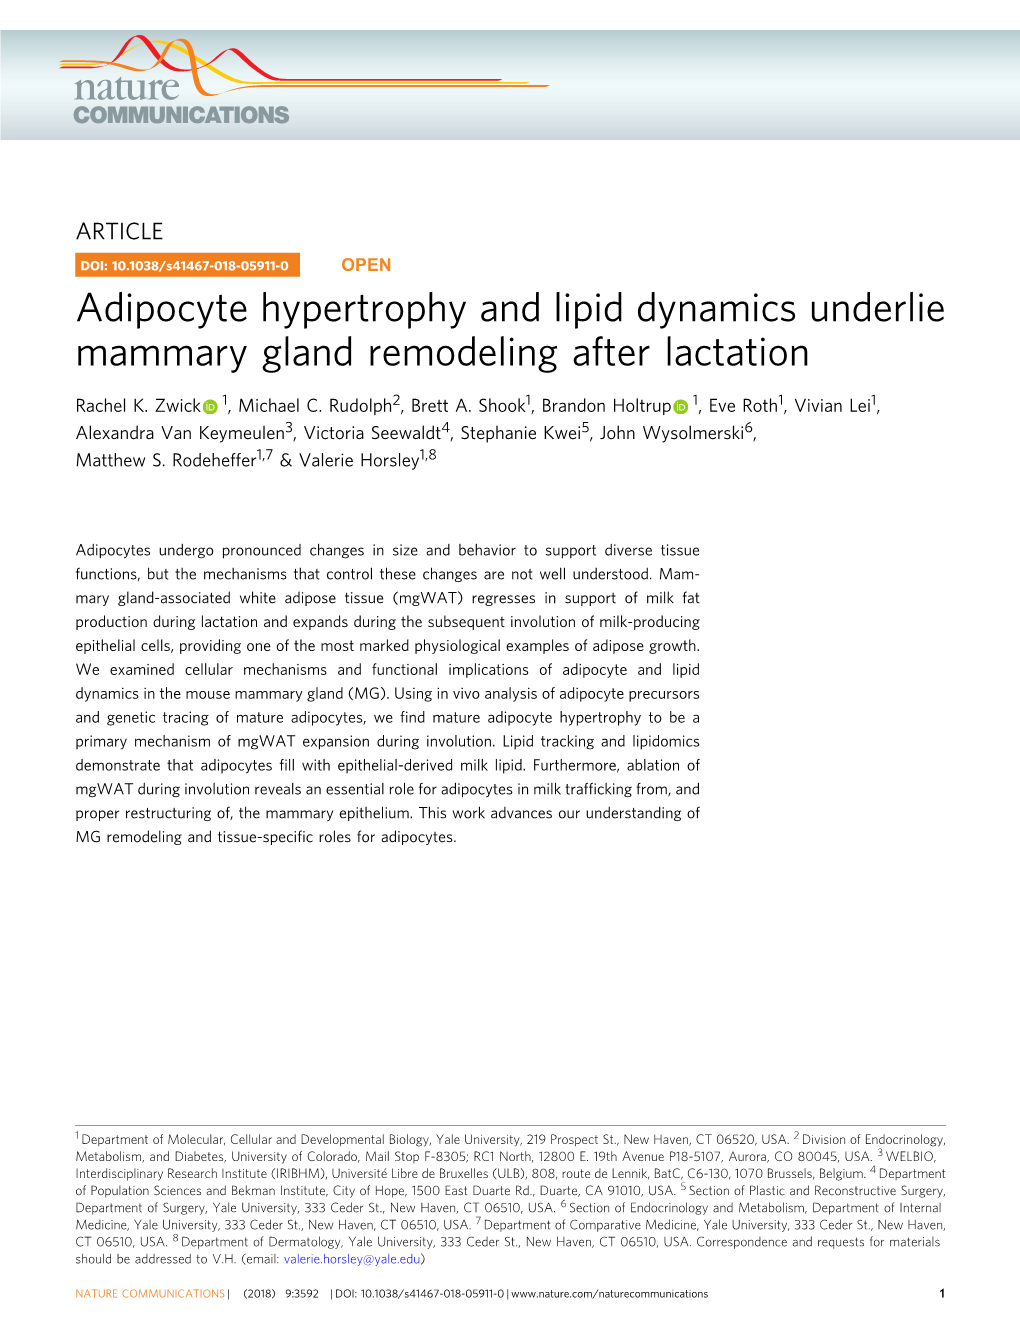 Adipocyte Hypertrophy and Lipid Dynamics Underlie Mammary Gland Remodeling After Lactation